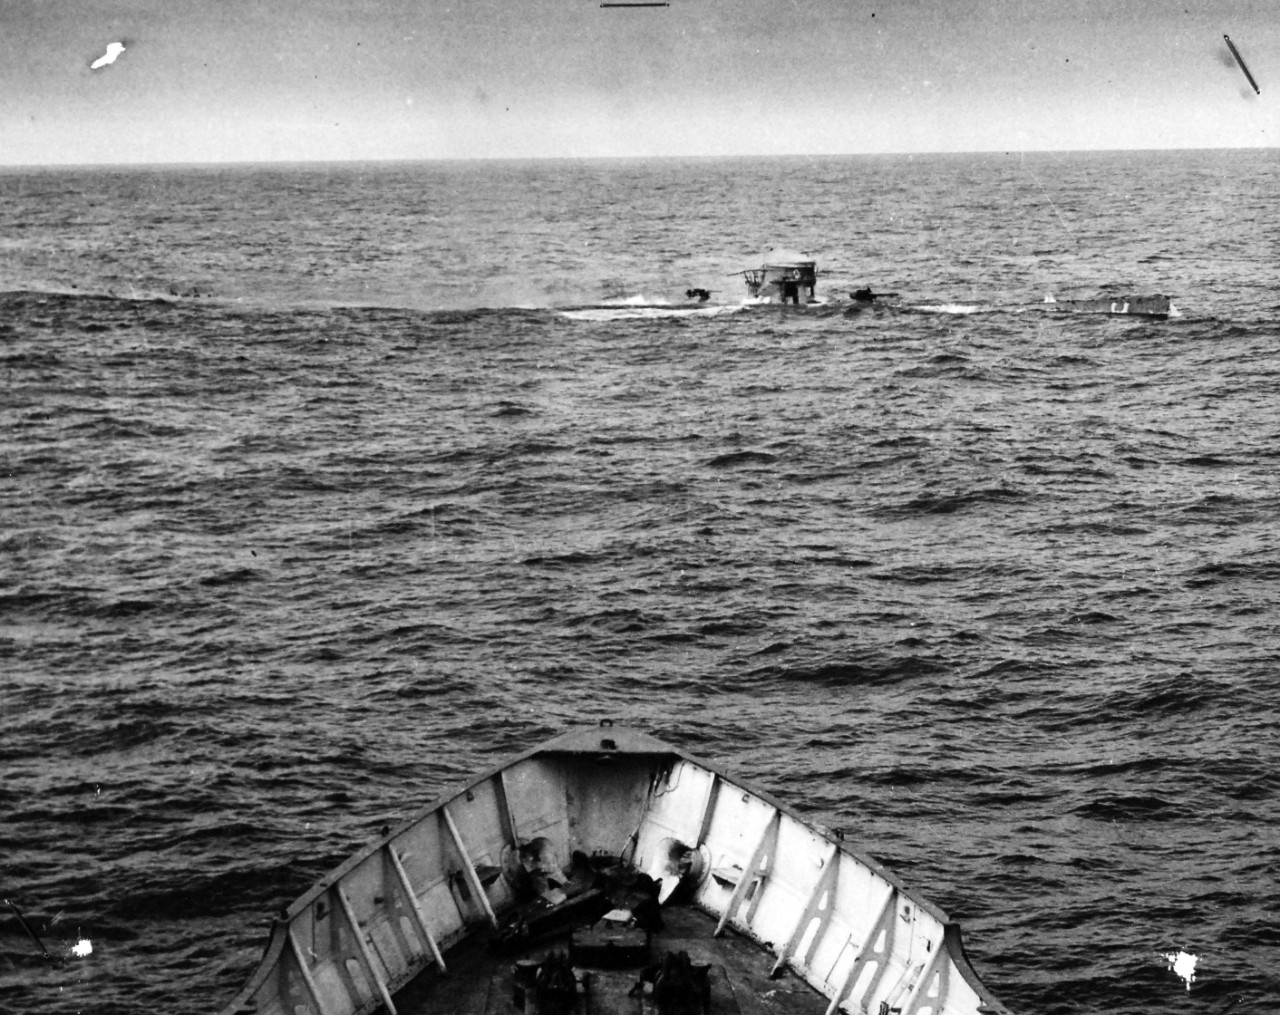 26-G-1513:  Sinking of German submarine U-175, April 1943.   The submarine was sunk off south-west of Ireland by USCGC Spencer (WPG-36) on April 17, 1943.    Original caption, “COAST GUARD CUTTER SINKS SUB: Heaved up from below by the force of a depth charge, the Nazi U-Boat breaks surface as the U.S. Coast Guard Cutter USCGC SPENCER (WPG-36), guns ablaze, bears down on it, full speed ahead." Date: 17 April 1943 (Note on the back of the photo notes: "Not to be released for publication or announced to the public before 10:00 A.M. Eastern War-Time, June 2nd.")  Photo No.: 1513 Official U.S. Coast Guard Photograph, now in the collections of the National Archives.  (2017/09/05).